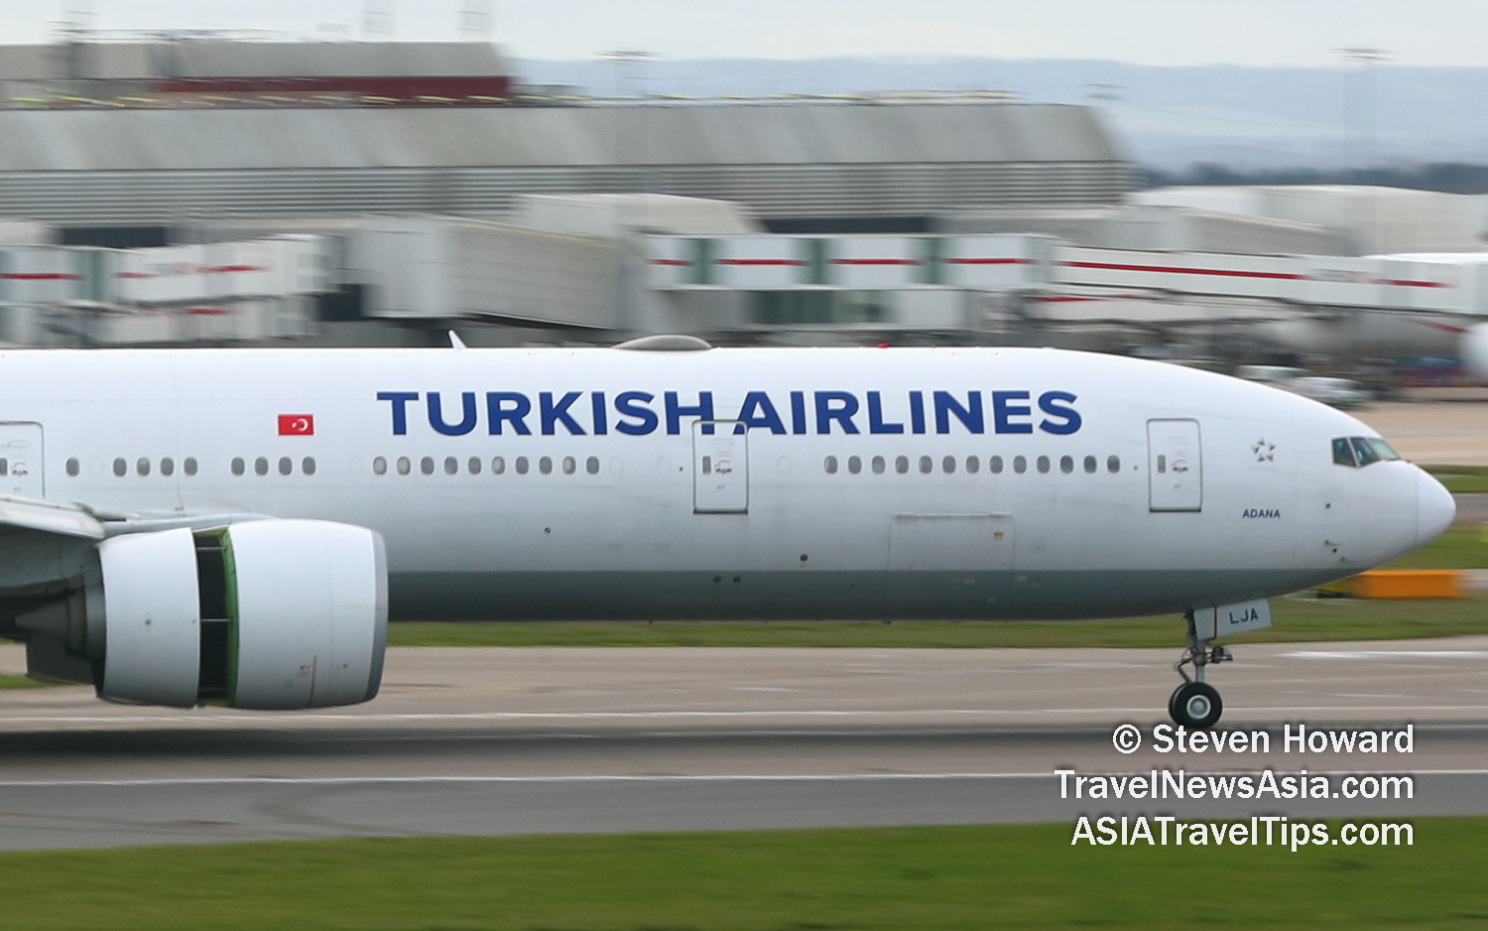 Turkish Airlines Boeing 777-300ER reg: TC-LJA. Picture by Steven Howard of TravelNewsAsia.com Click to enlarge.